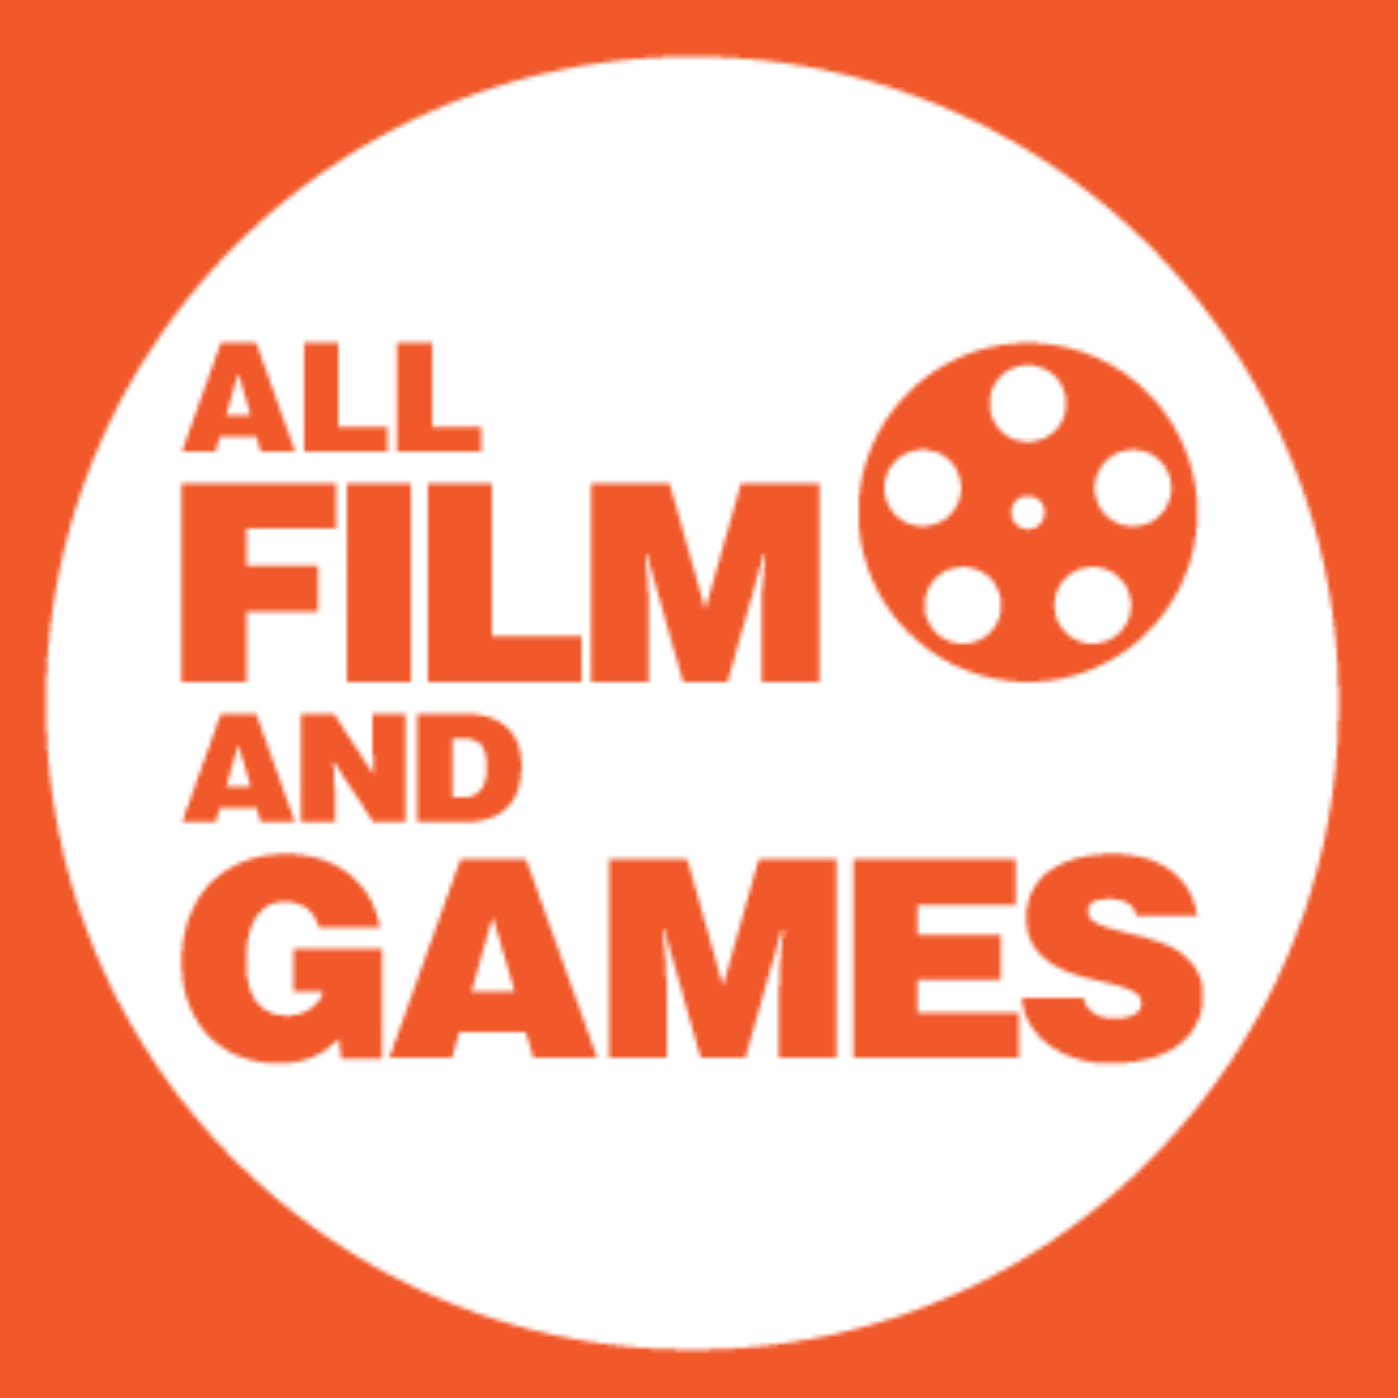 It’s All Film And Games